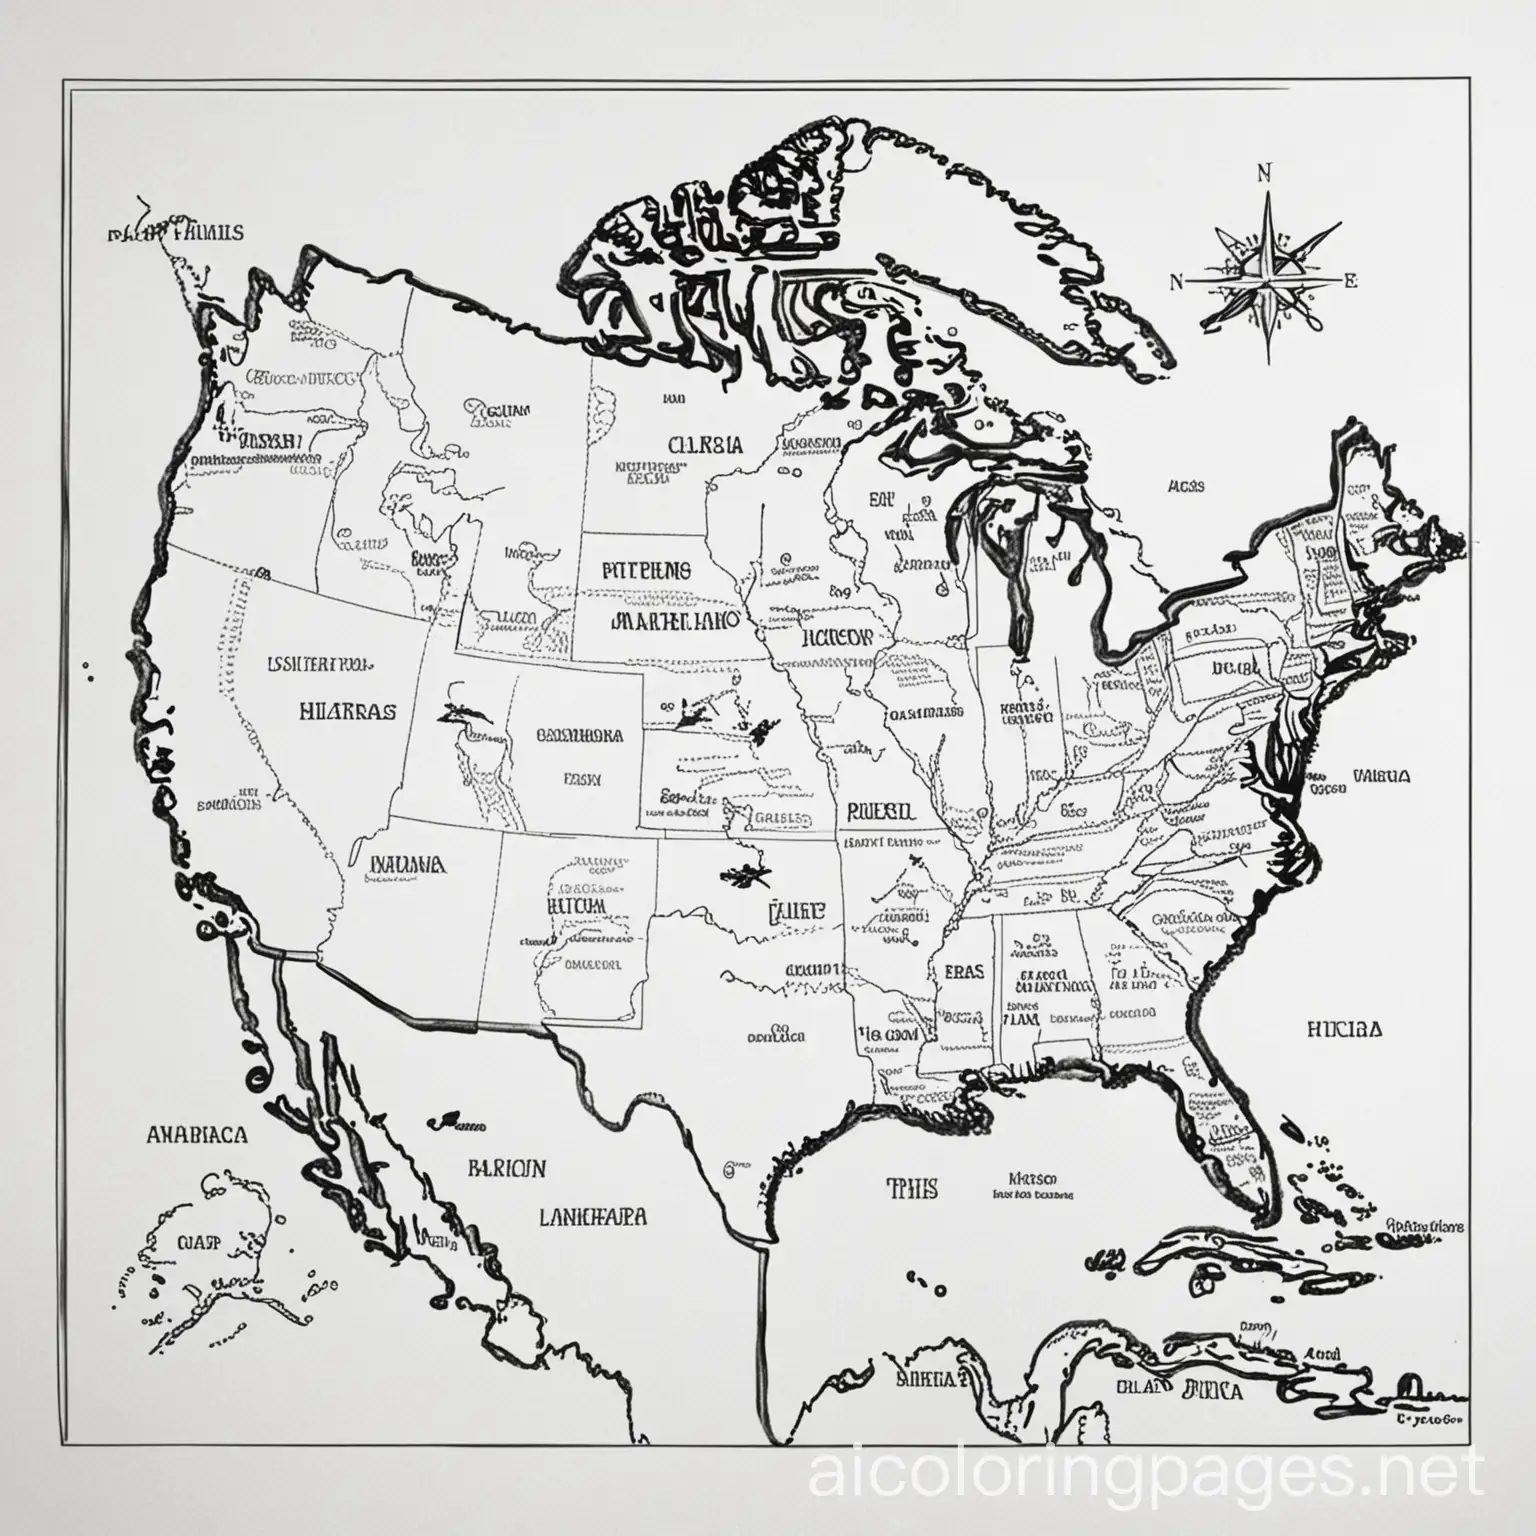 simple map of north america with 10 simple landmarks
, Coloring Page, black and white, line art, white background, Simplicity, Ample White Space. The background of the coloring page is plain white to make it easy for young children to color within the lines. The outlines of all the subjects are easy to distinguish, making it simple for kids to color without too much difficulty